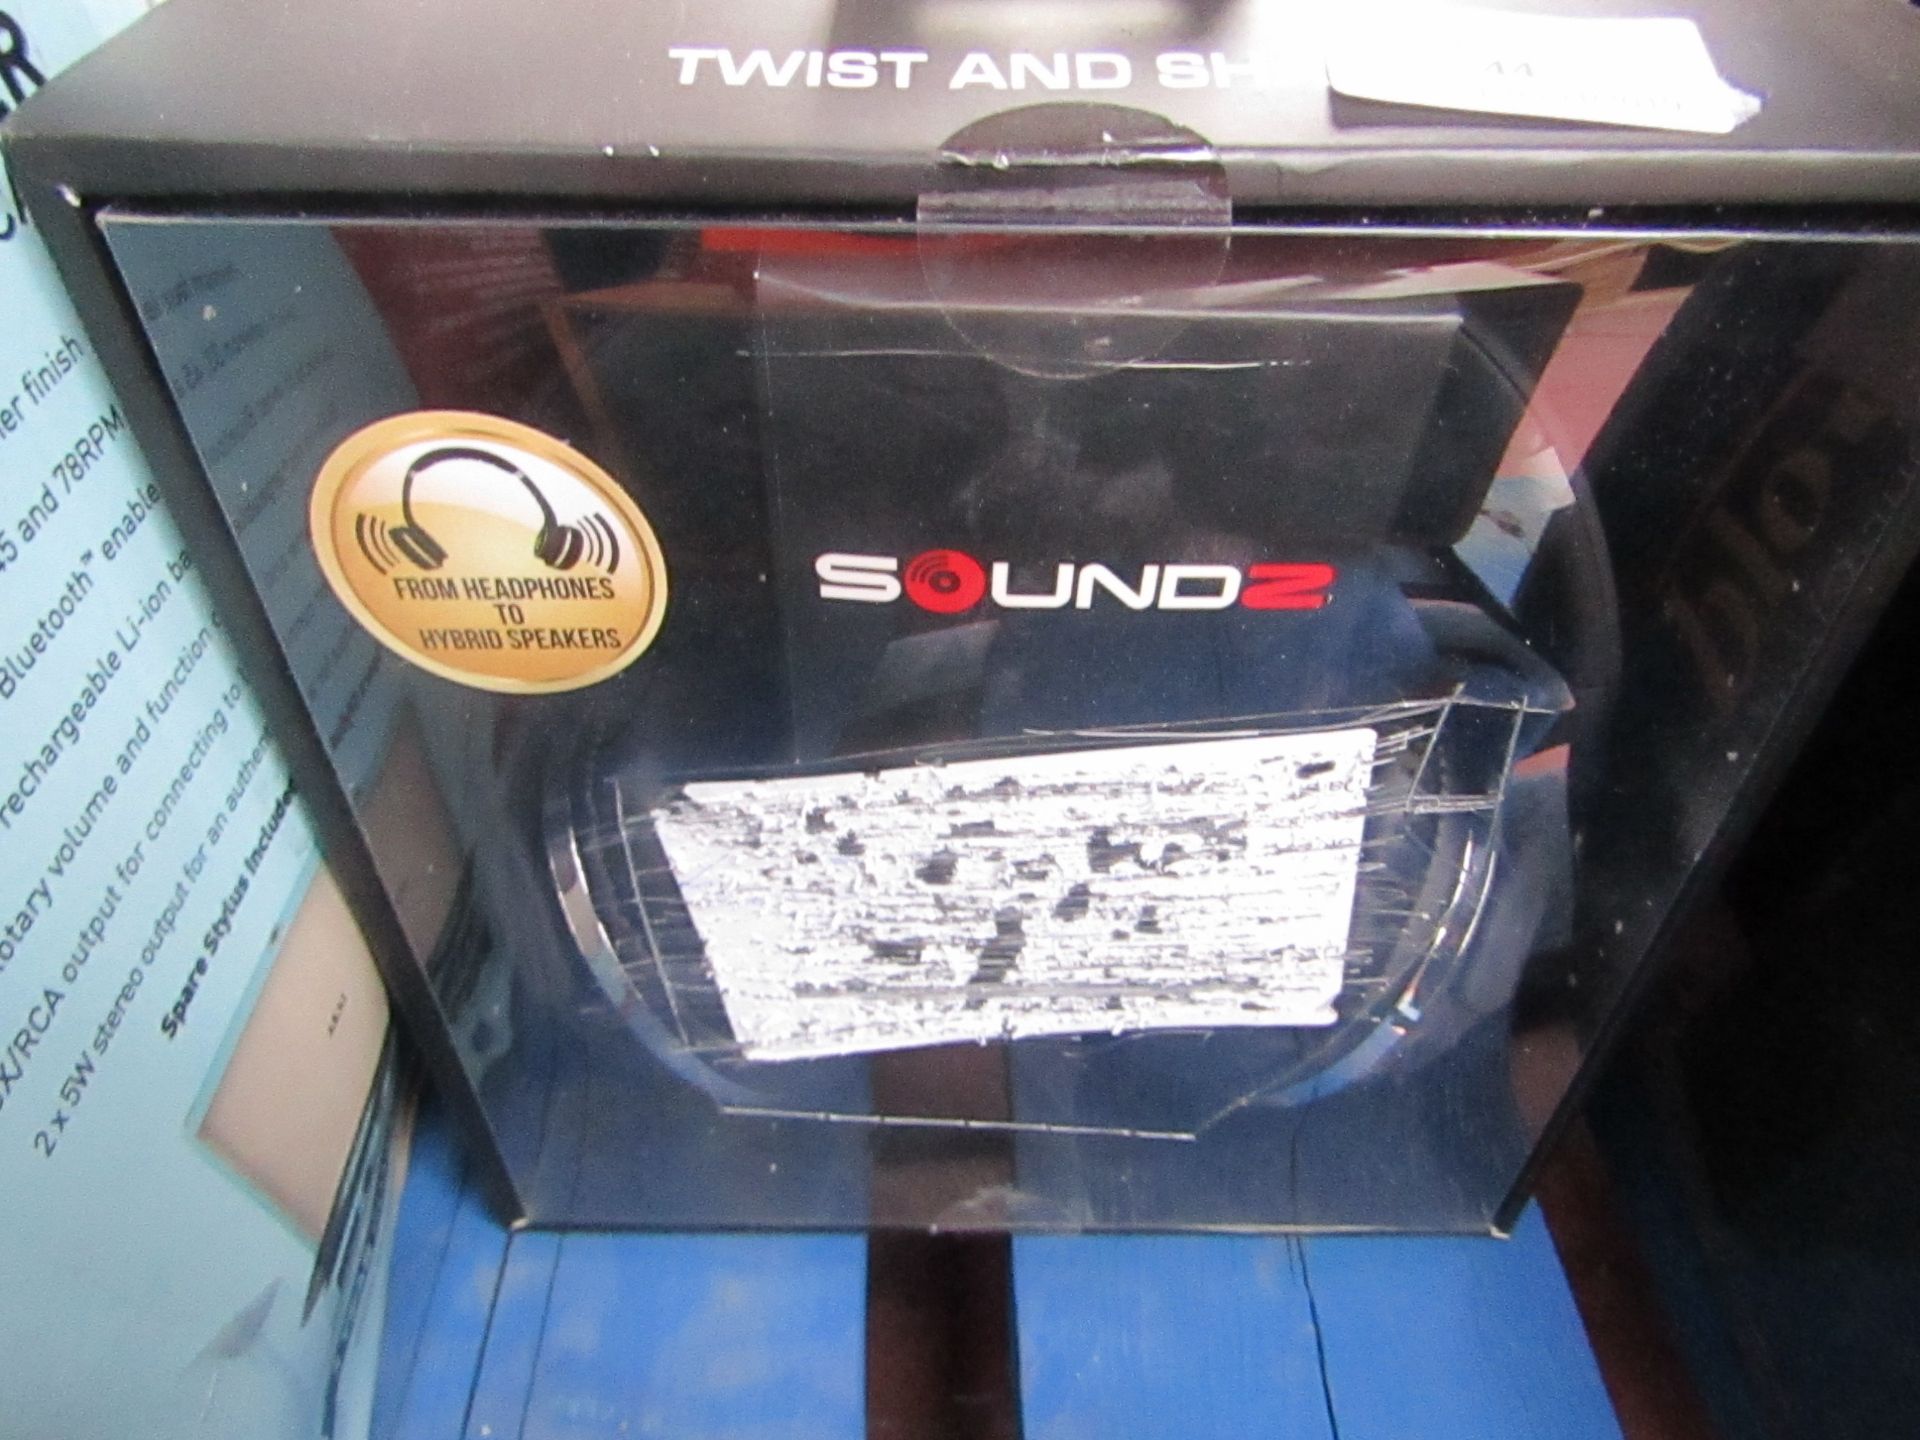 sounds tgwist bluetooth headphone untested and boxed